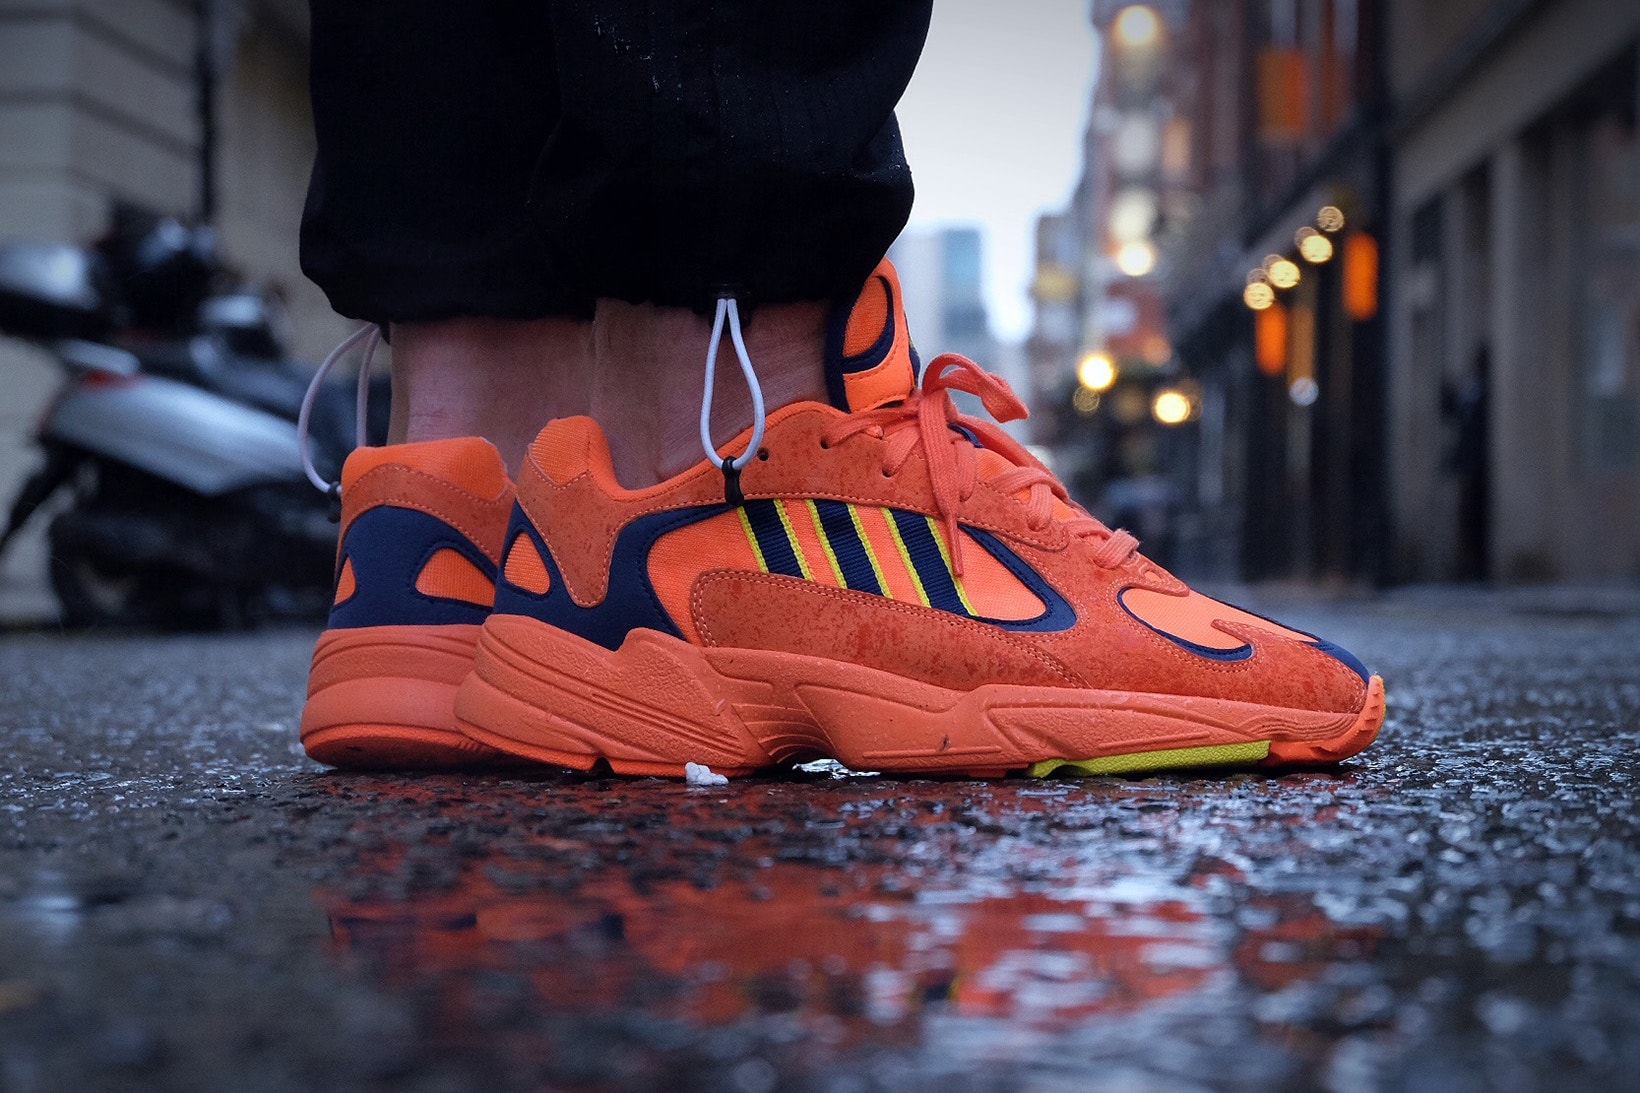 adidas Yung-1 Sneakers Collection New Dragon Ball Z Yeezy Wave Runner